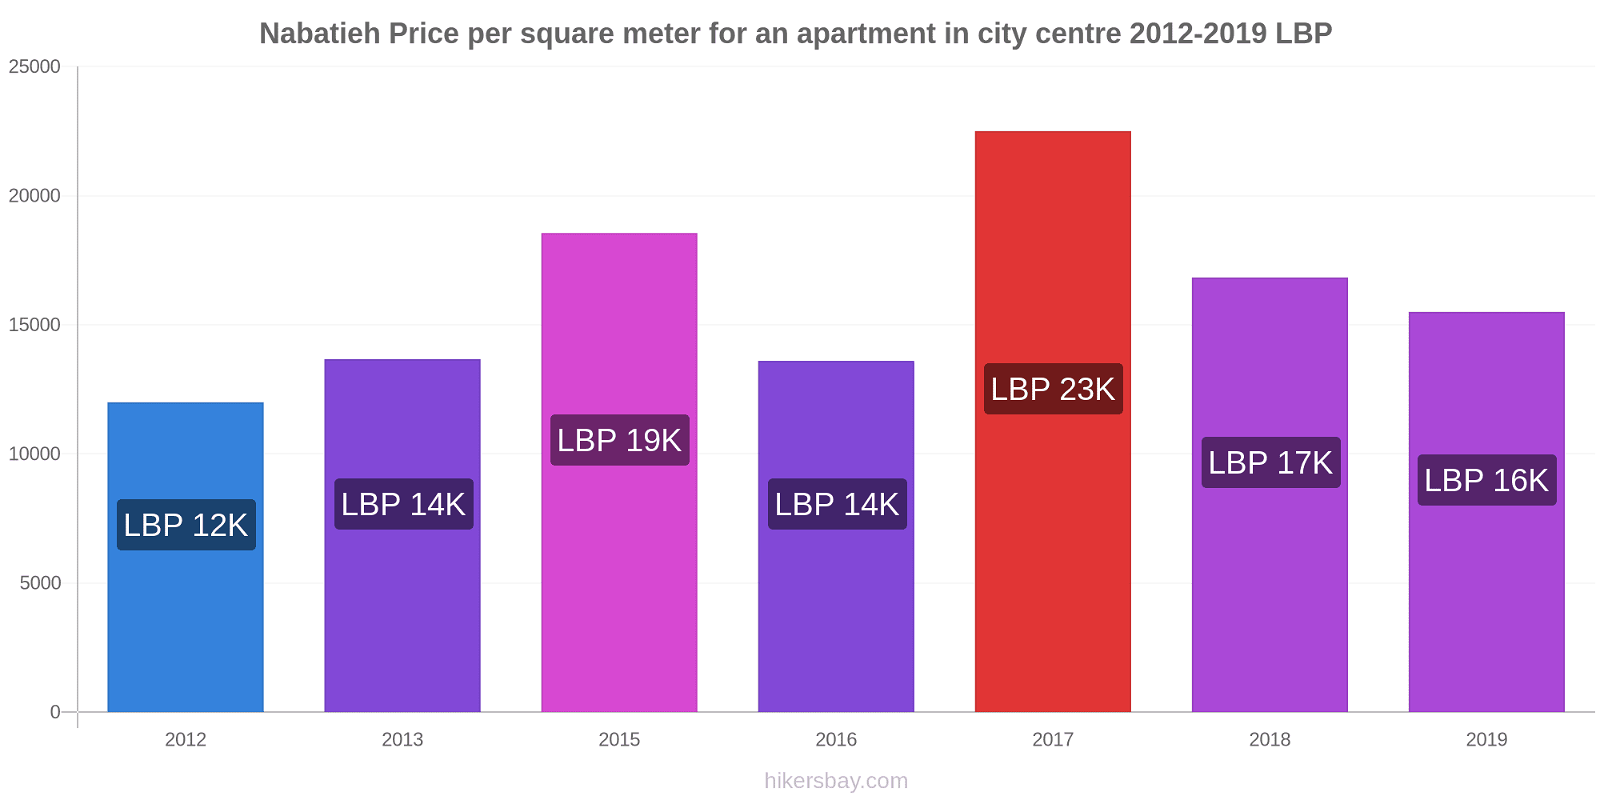 Nabatieh price changes Price per square meter for an apartment in city centre hikersbay.com